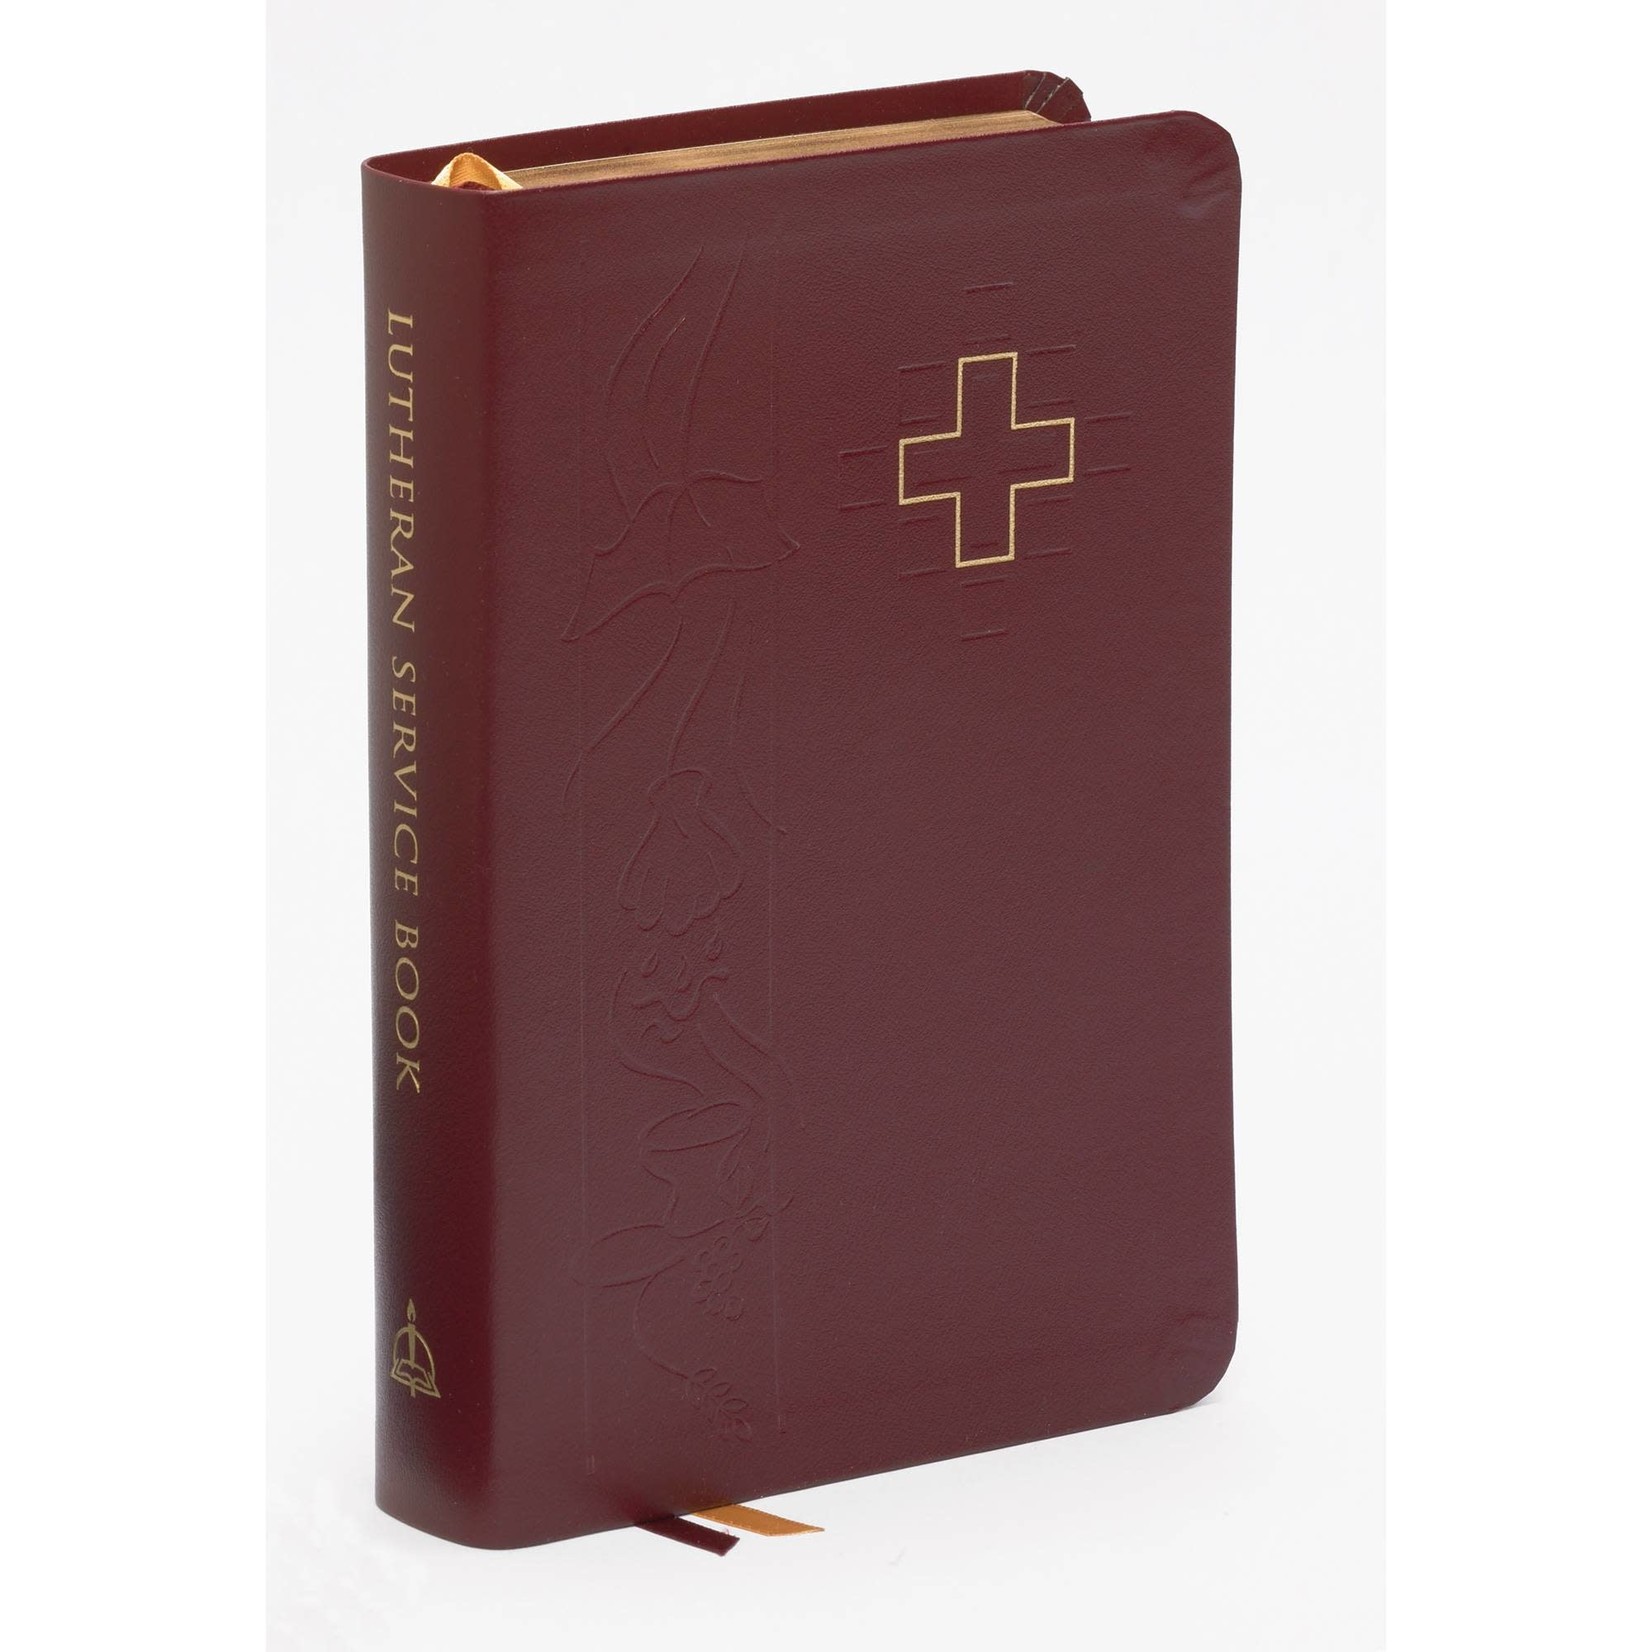 Lutheran Service Book - Gift Edition